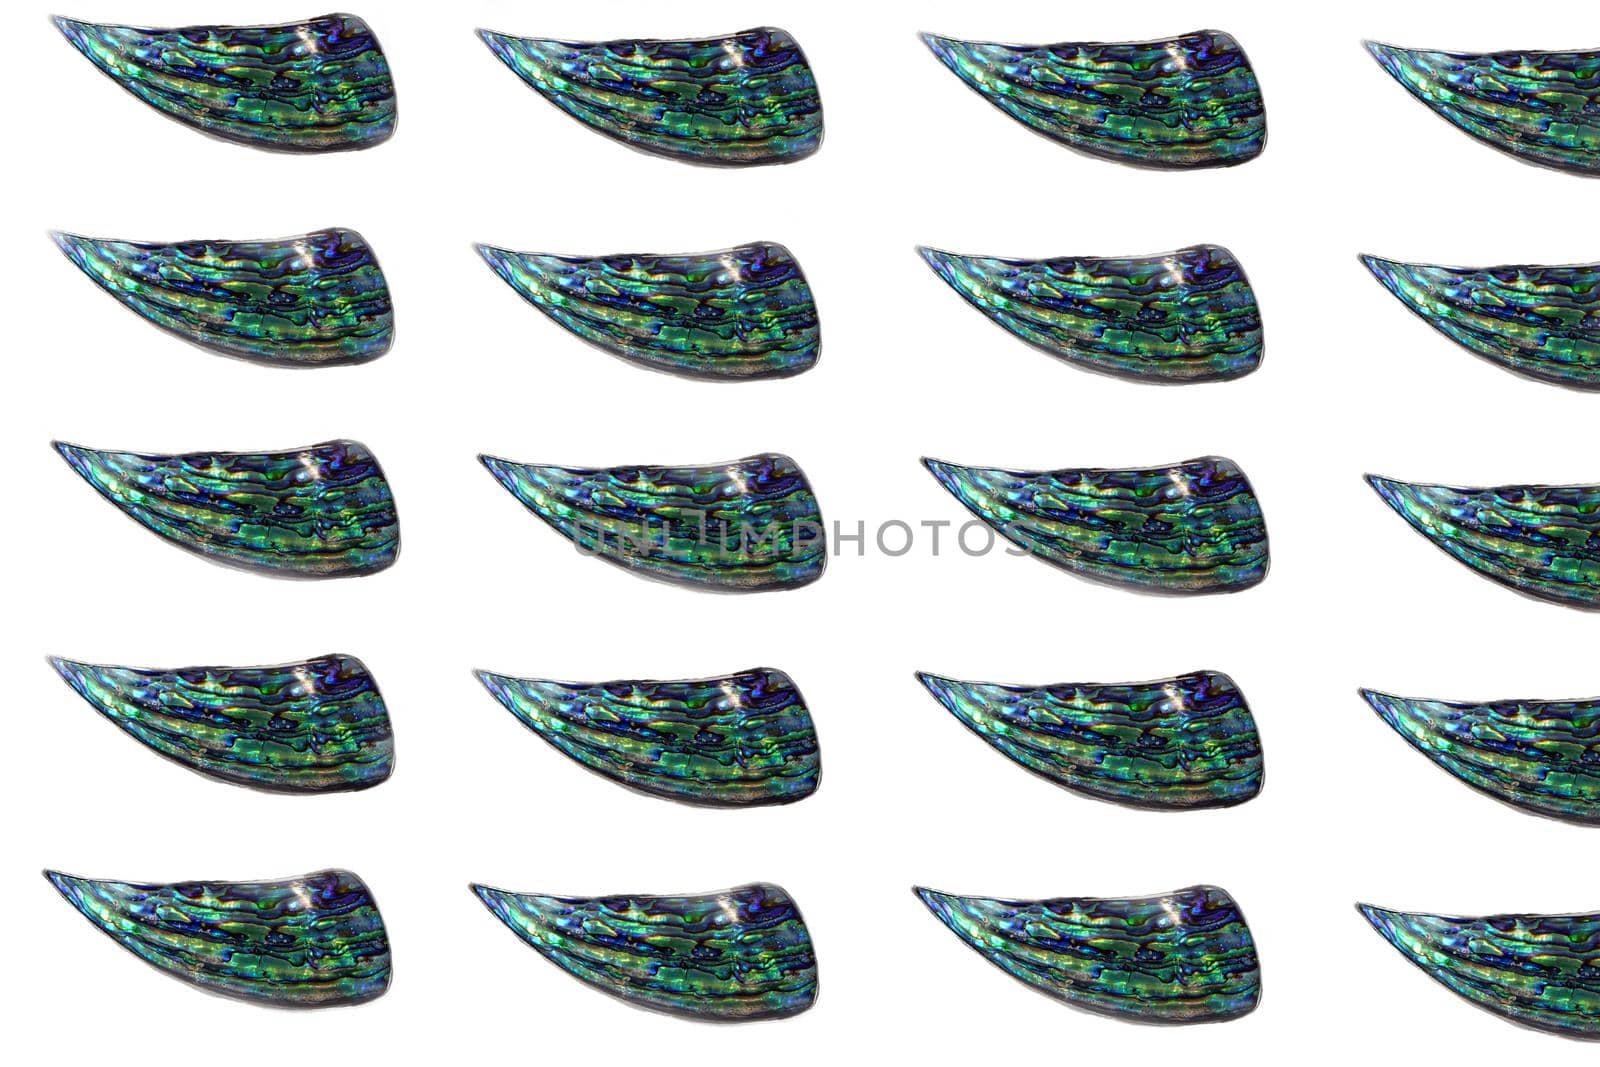 slices of polished nacre - pattern or abstract image pf blue polished surface of nacre mollusk shells isolated on white background.